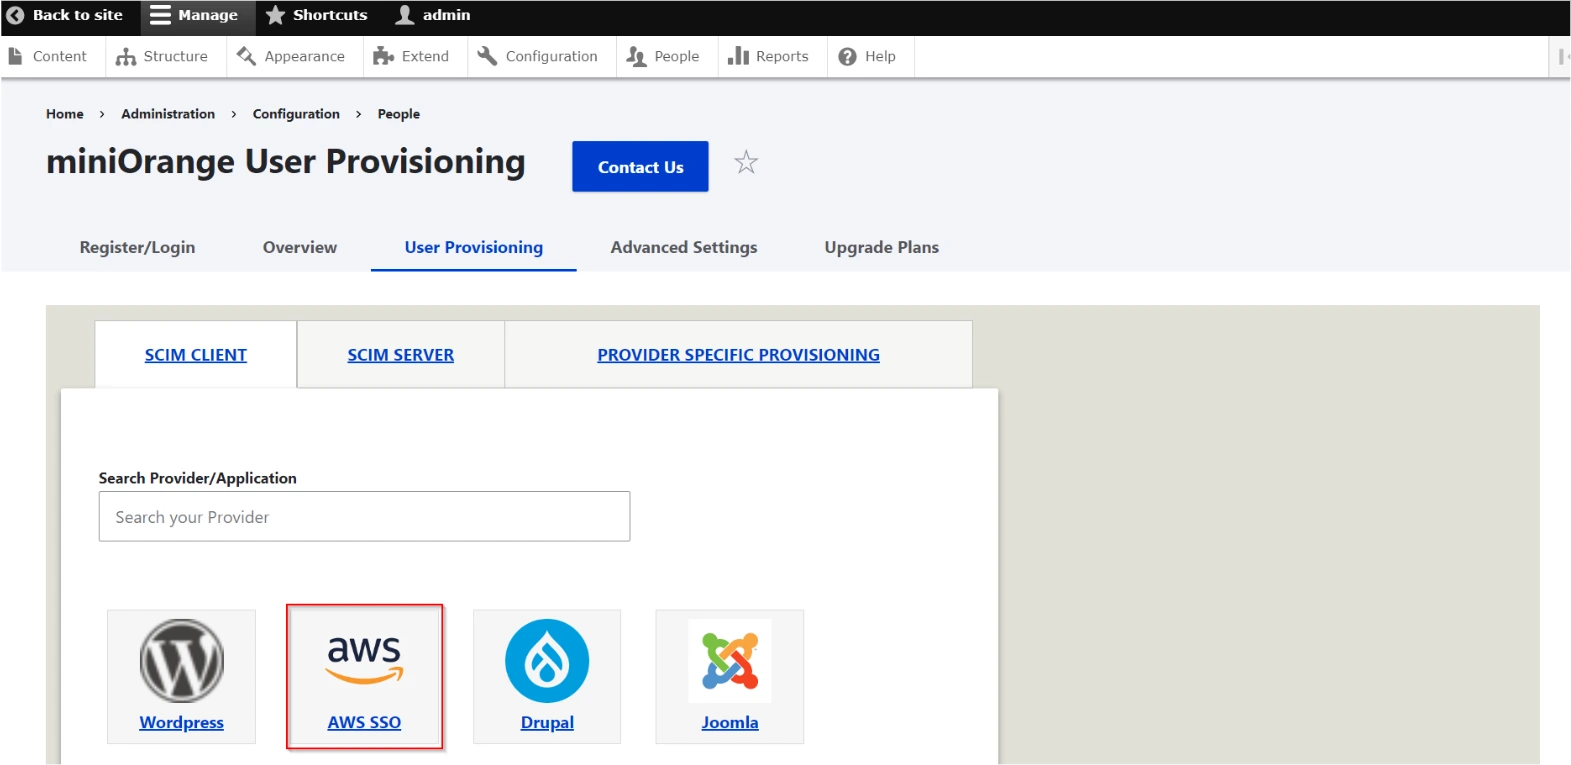 Drupal user provisioning and Sync - Go to user provisioning tab and select aws sso application